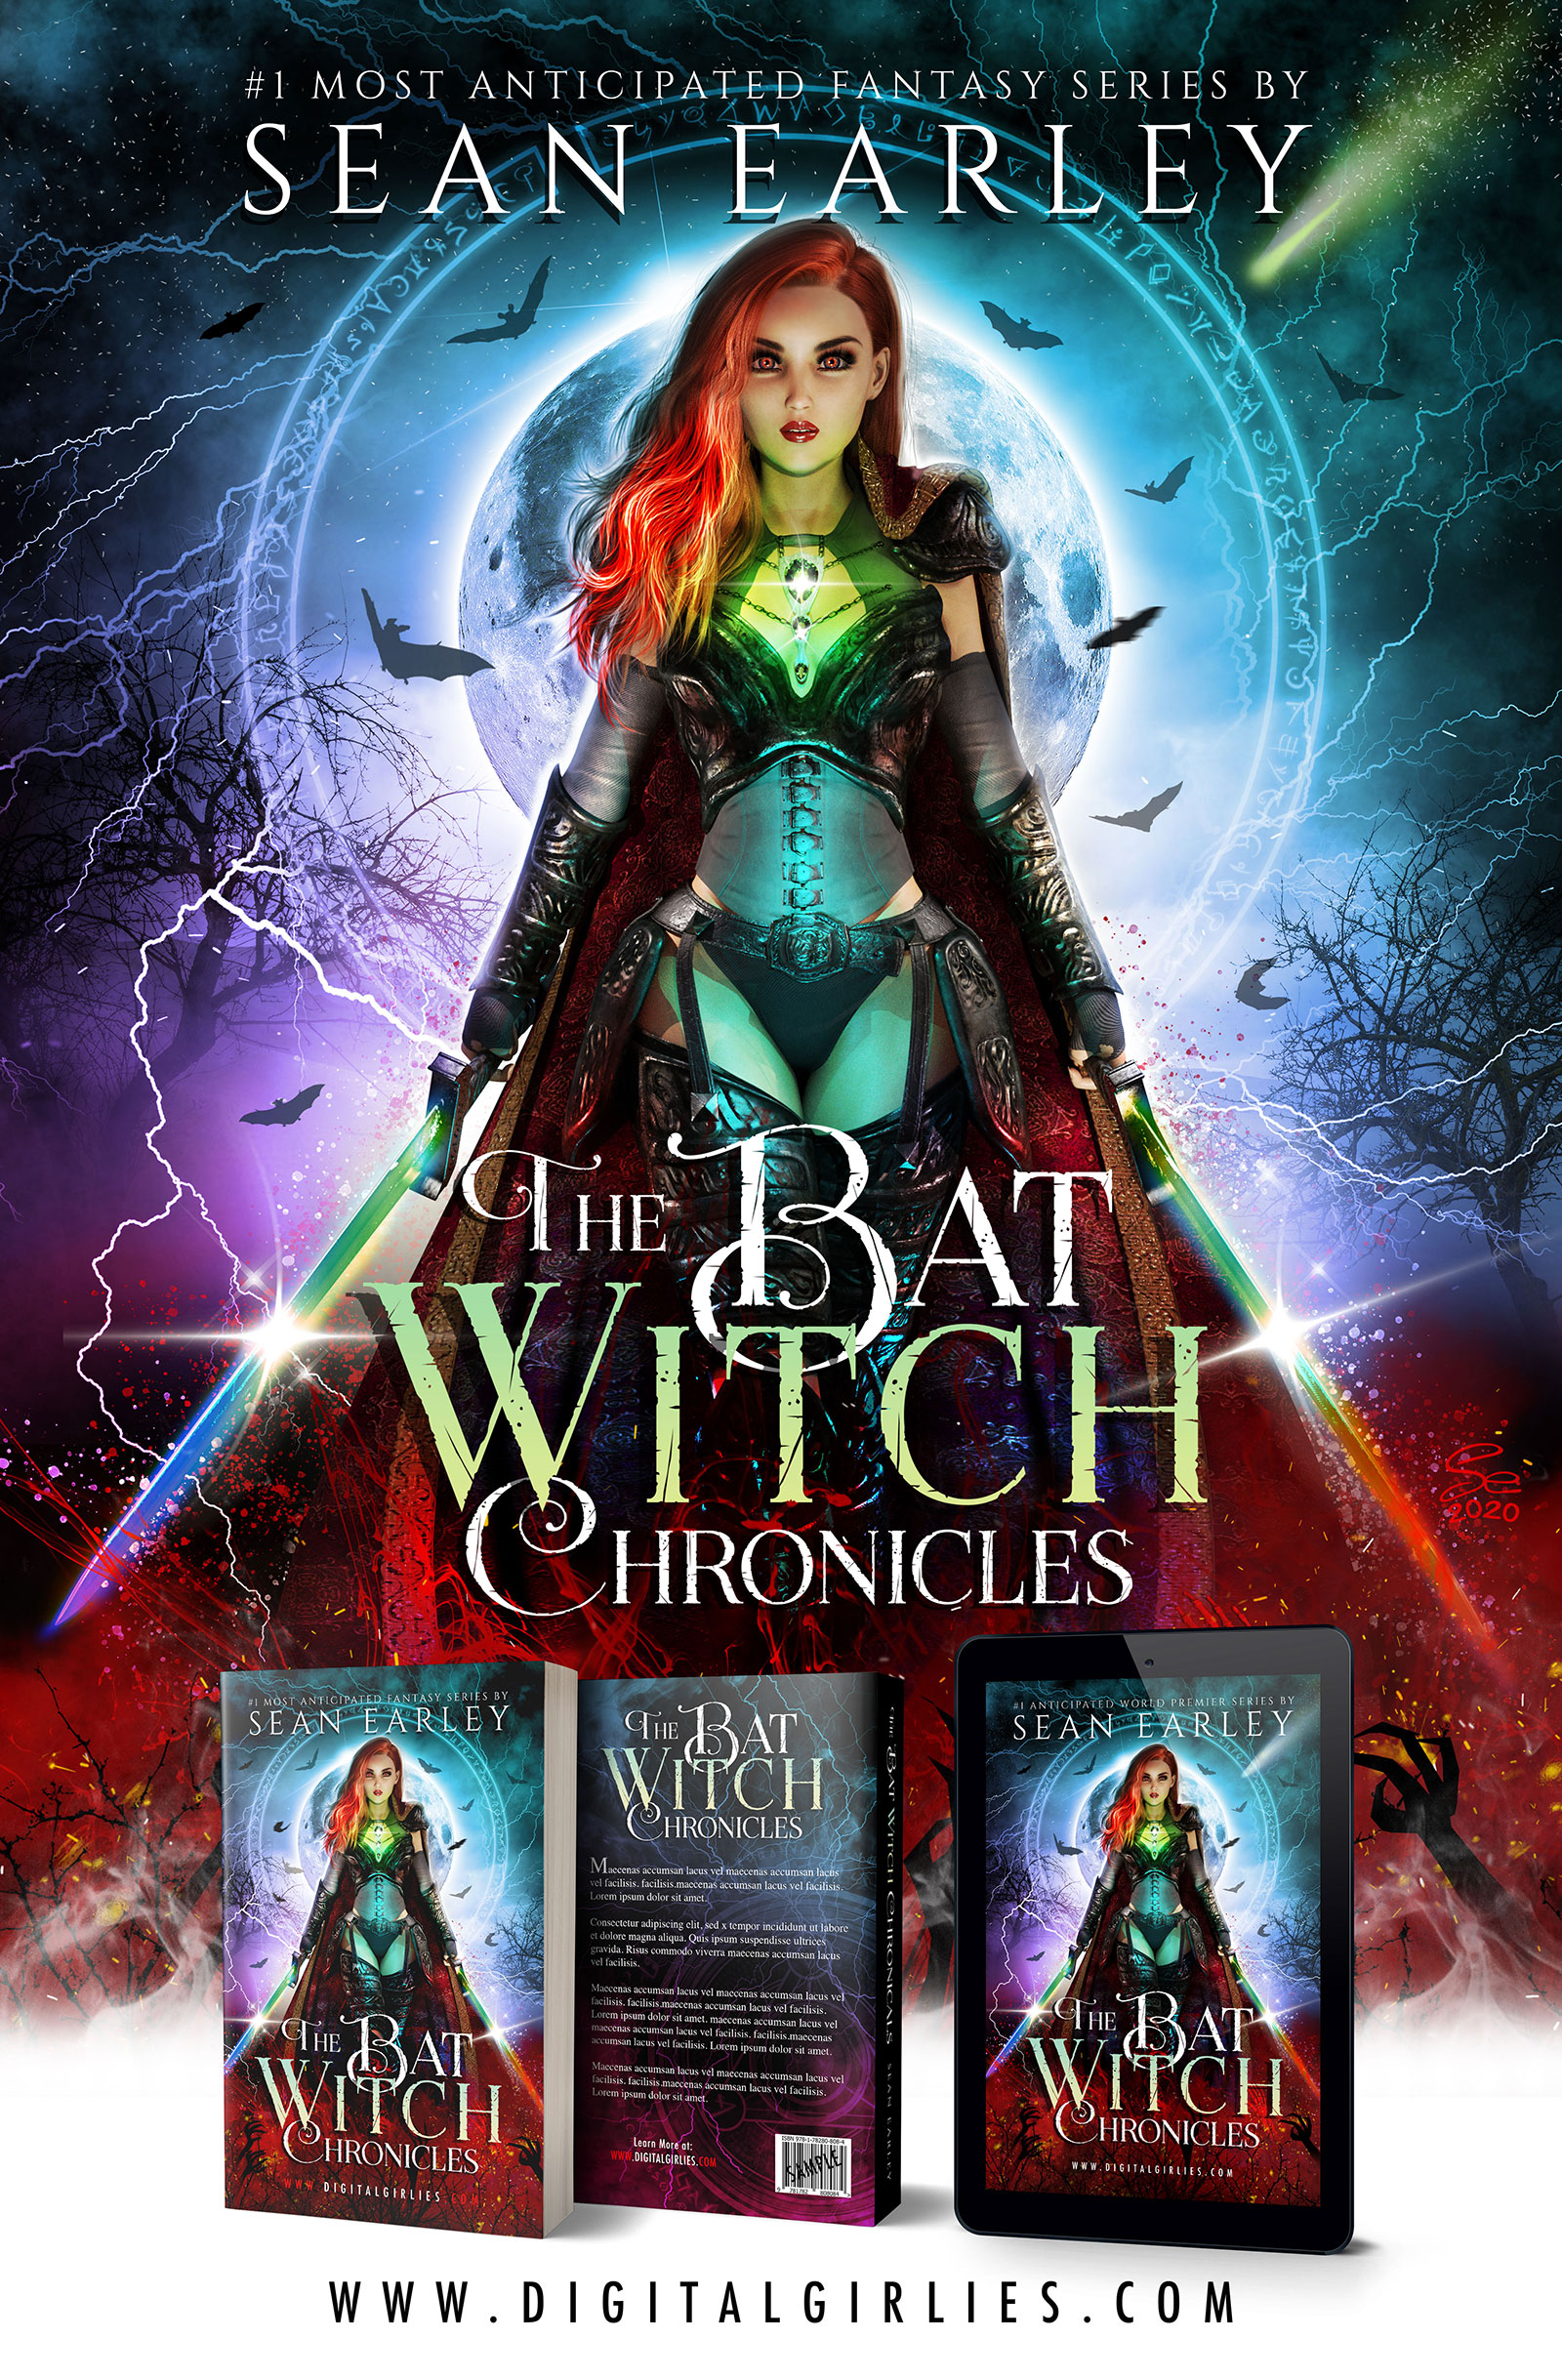 The Bat Witch Chronicles by Sean Earley